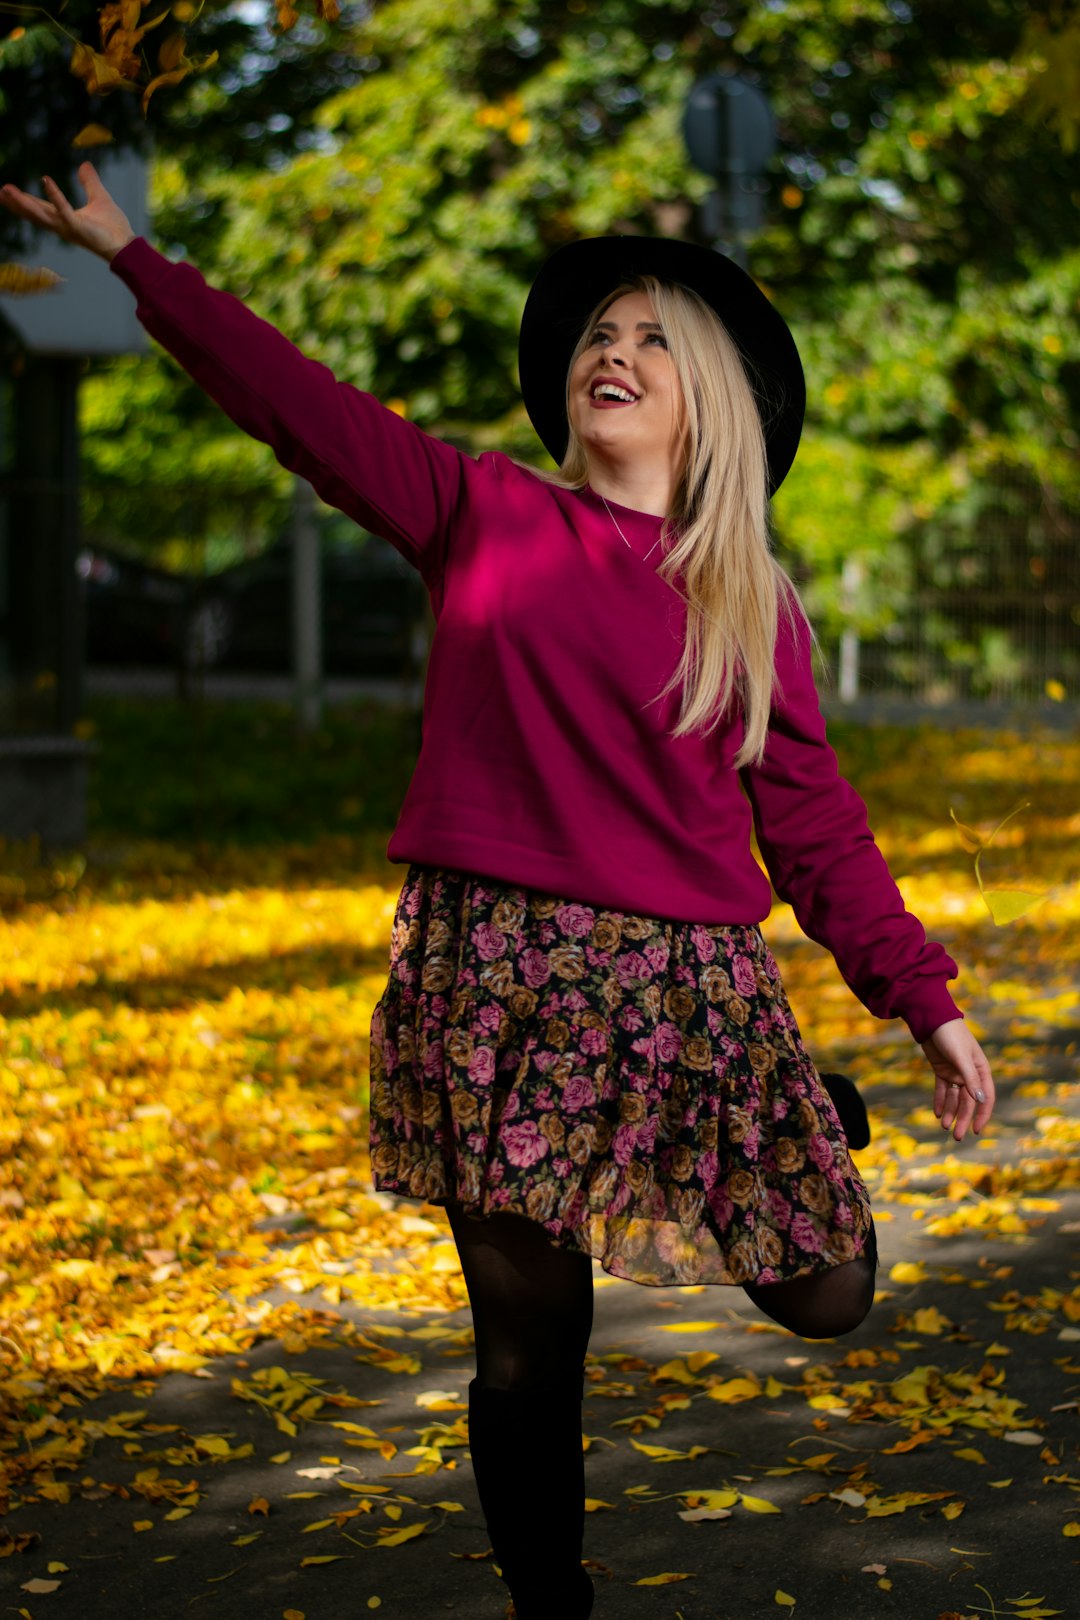 woman in pink long sleeve shirt and black and white floral skirt standing on yellow leaves